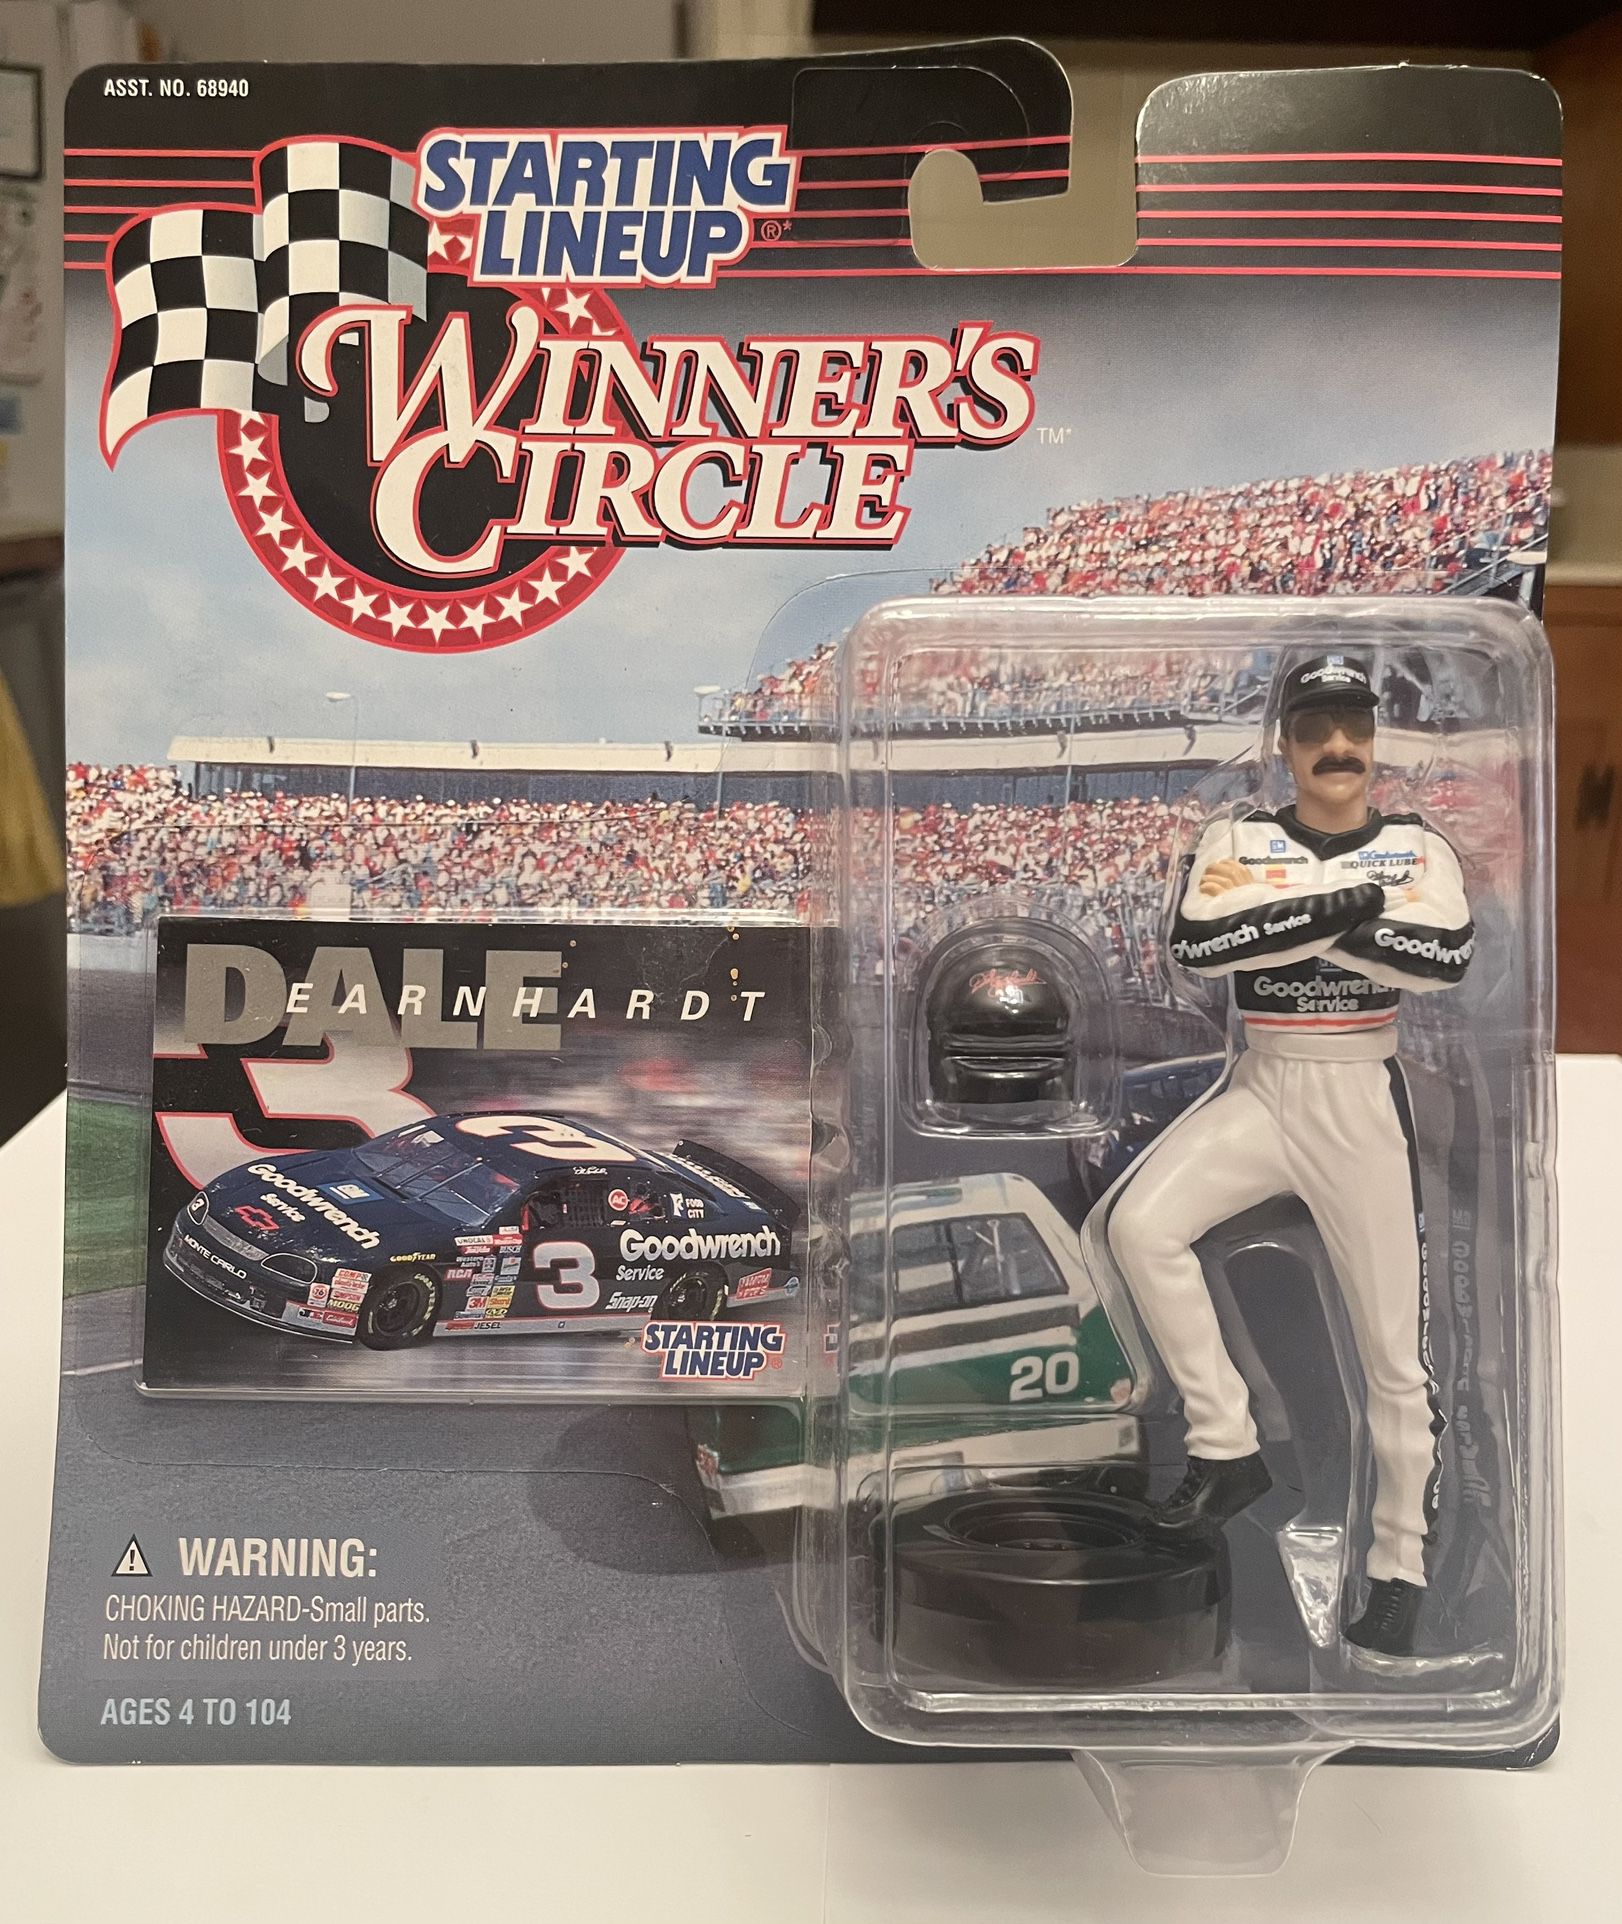 1997 Kenner Starting Lineup Winner's Circle Dale Earnhardt Good wrench NIB with card 